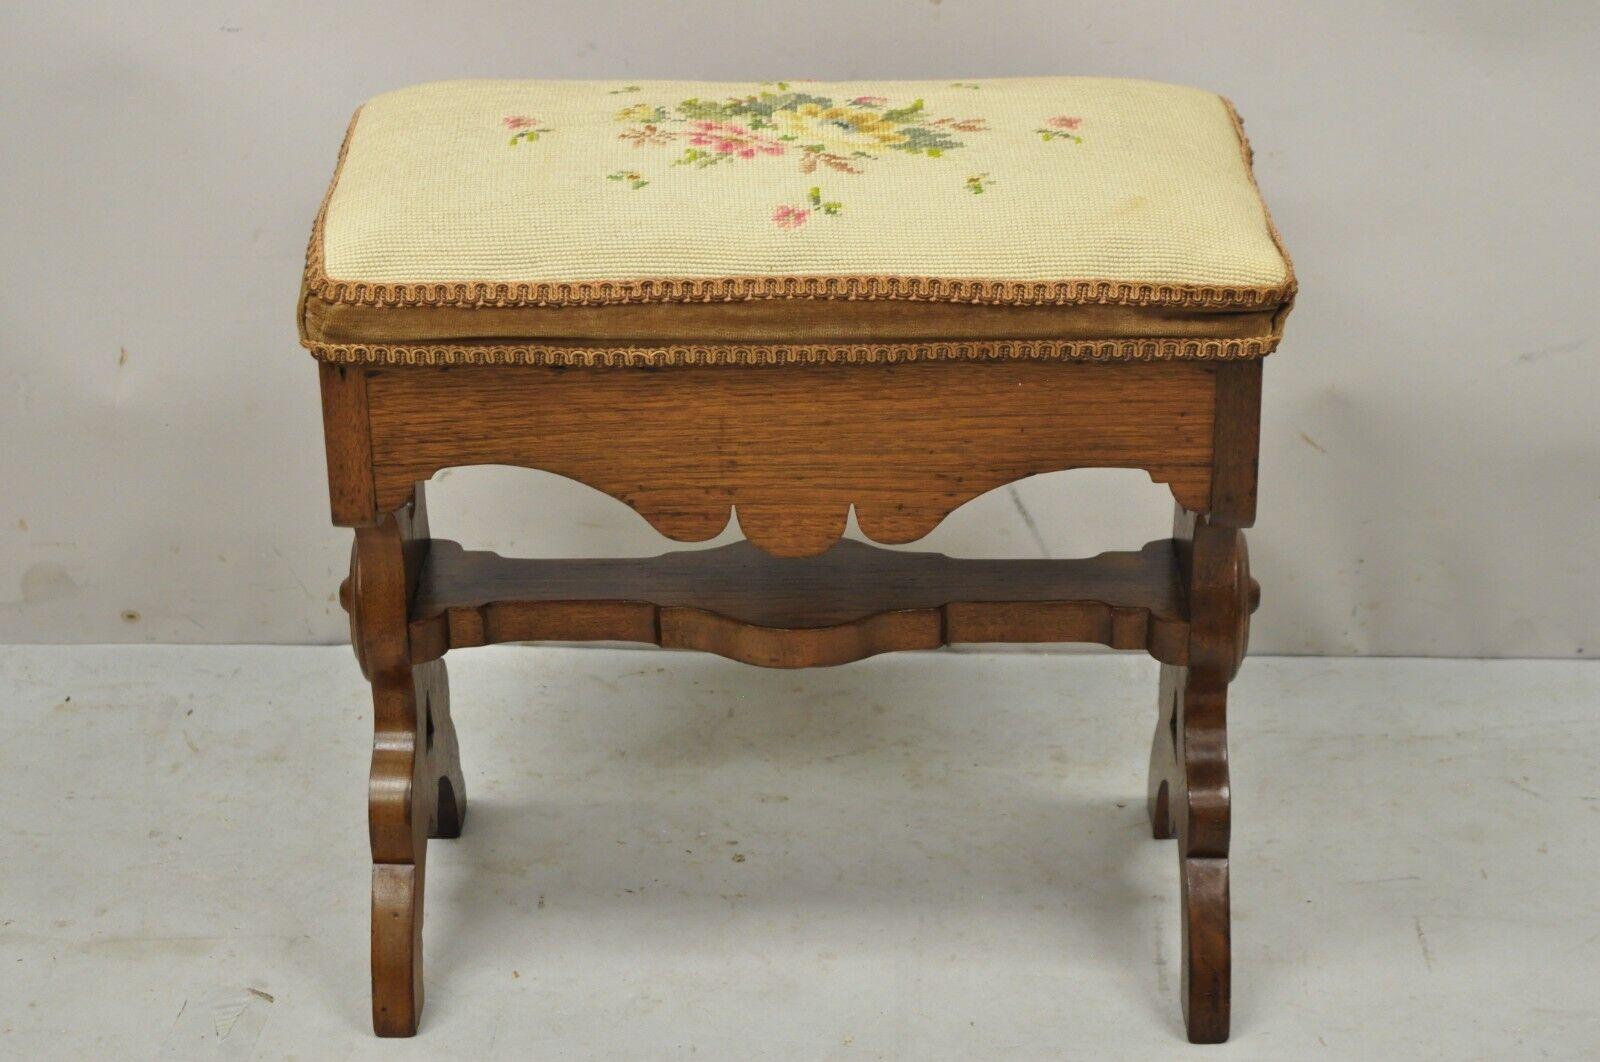 Antique Eastlake Victorian Carved Walnut Stool Bench with Needlepoint Seat For Sale 5